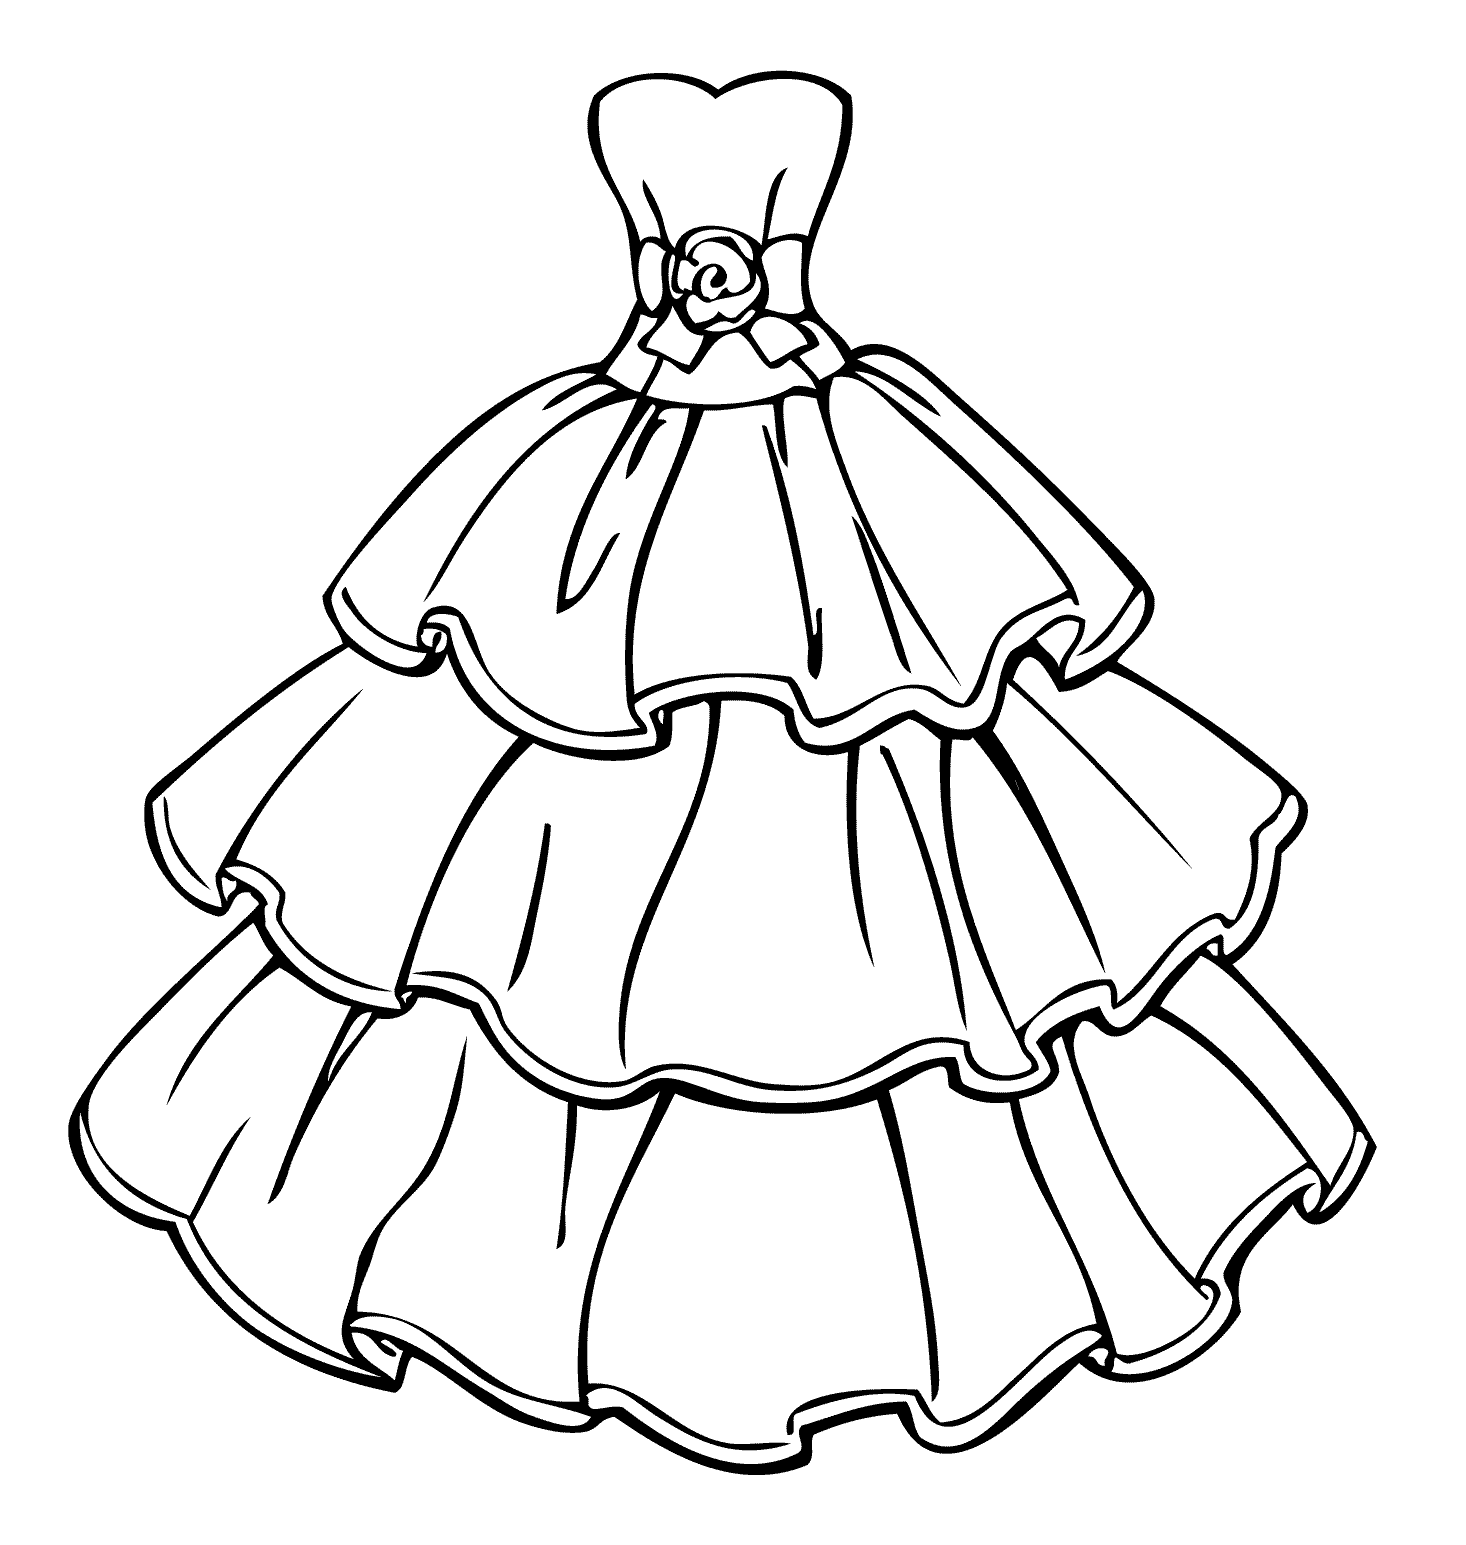 Girls Wedding Dress Coloring Pages